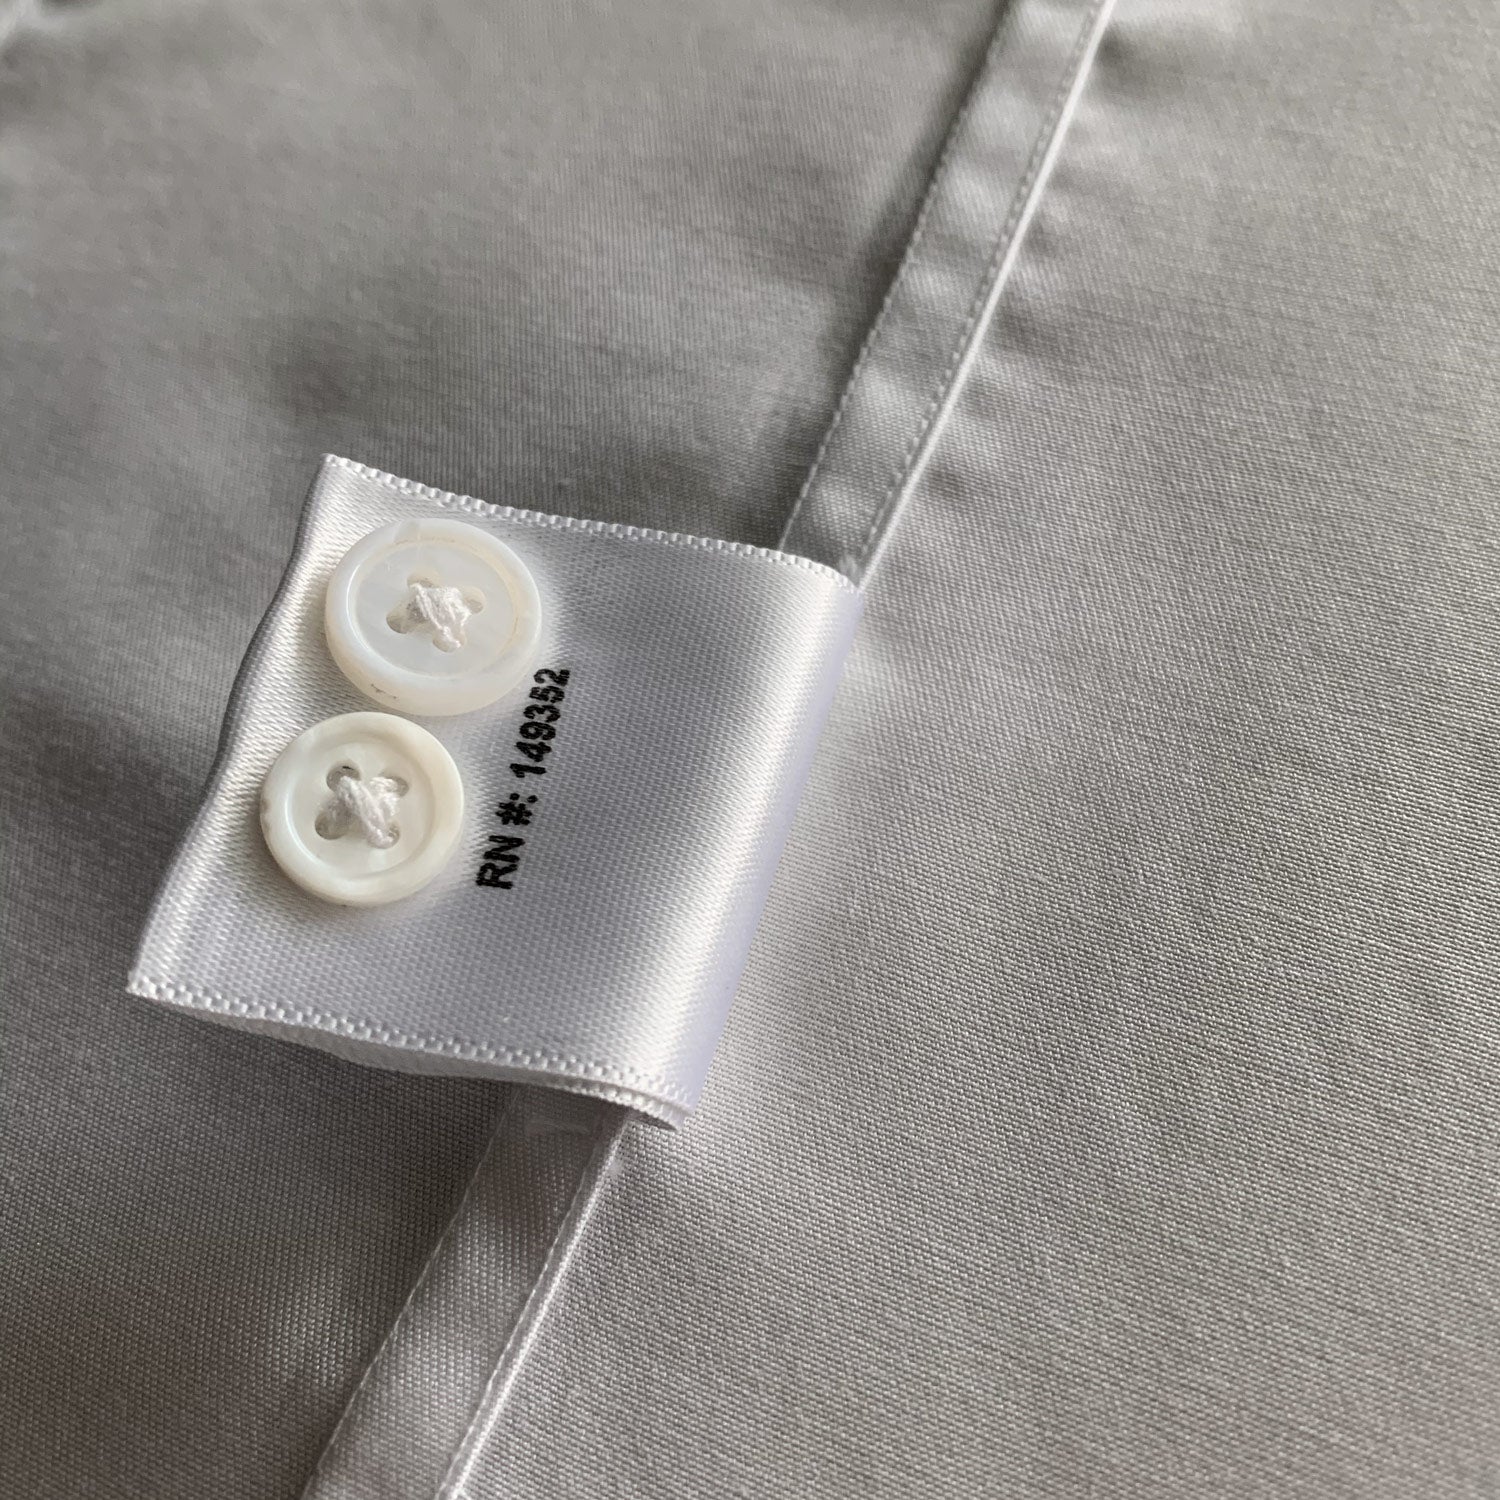 Spare buttons on high quality mens dress shirt